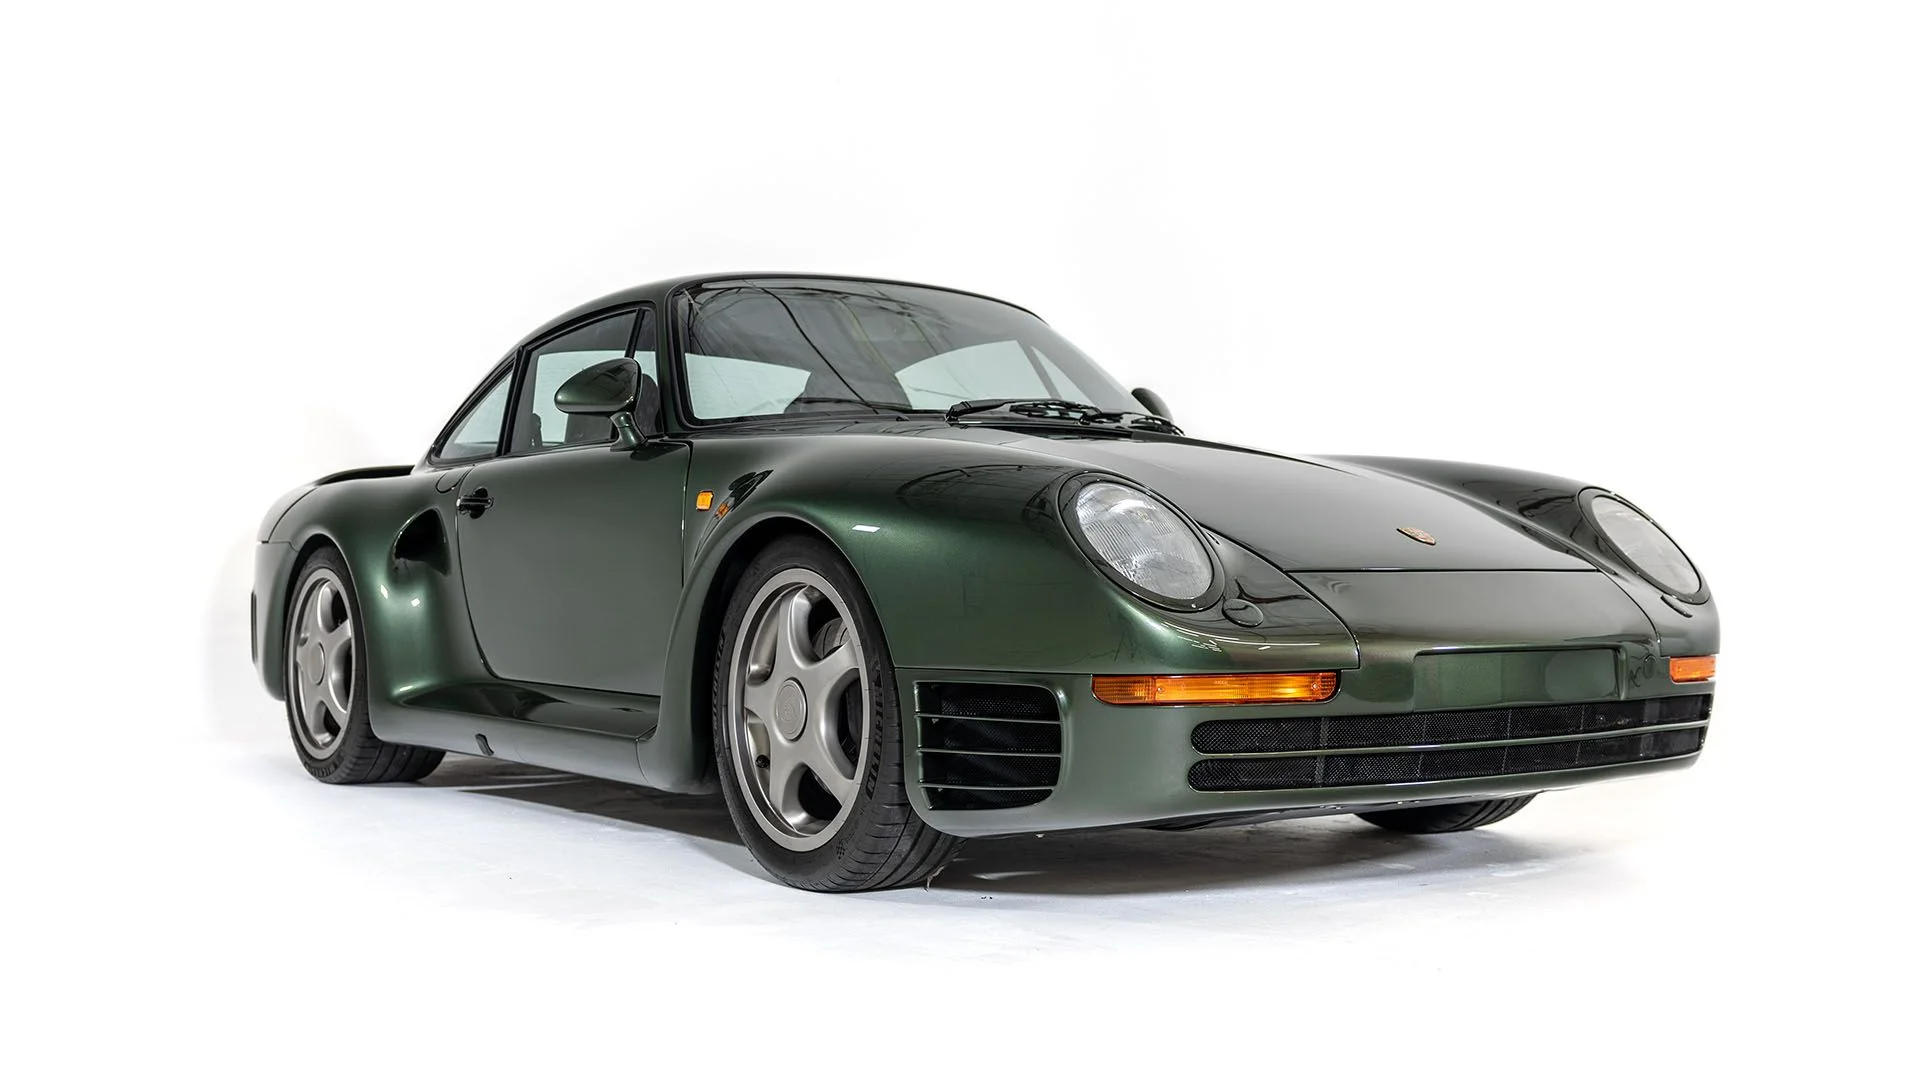 Without this Porsche 959 there would be no Nissan GT-R